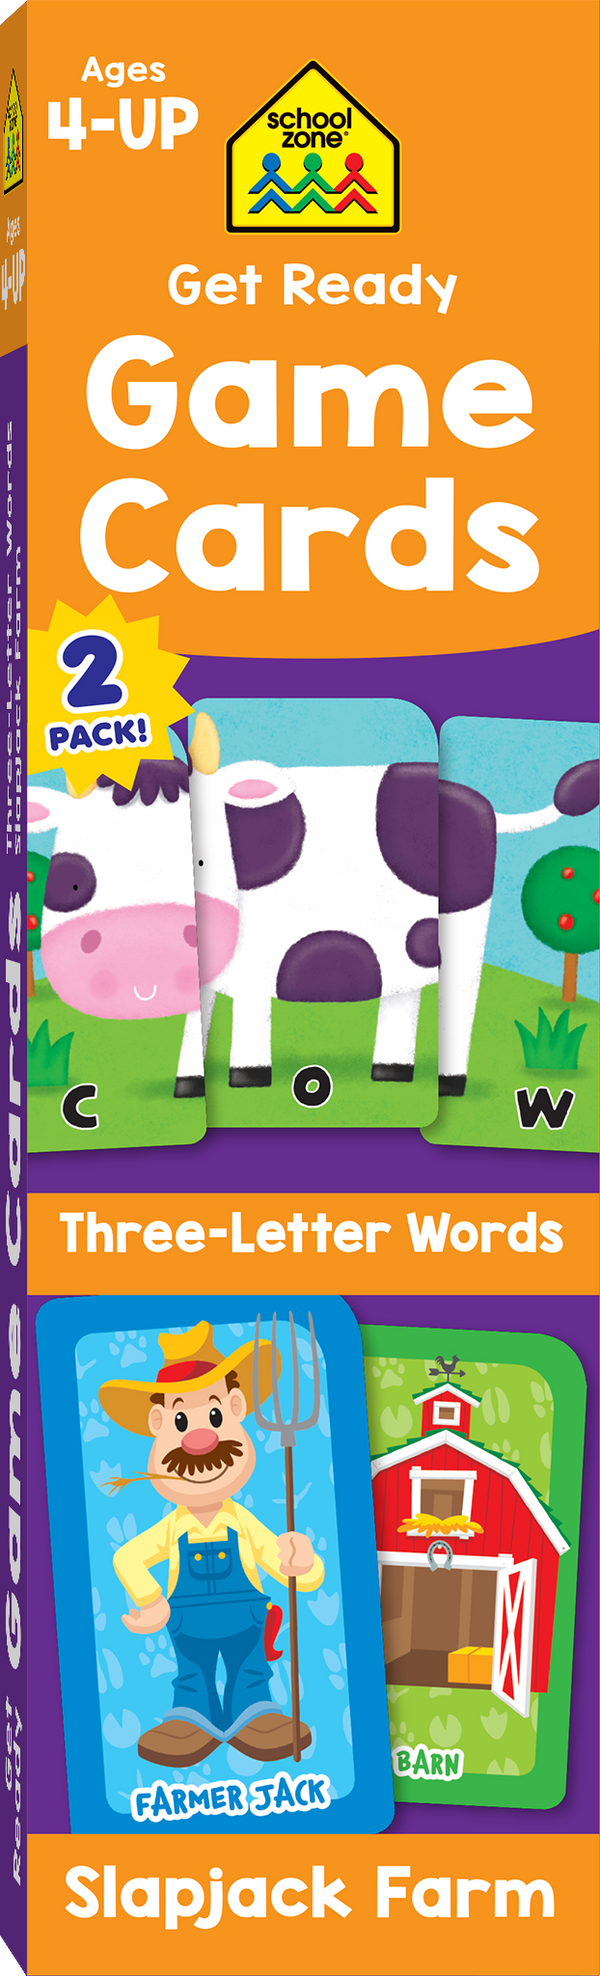 Get Ready Game Cards Three-Letter Words & Slapjack Farm 2-Pack Will Make Learning Fun!